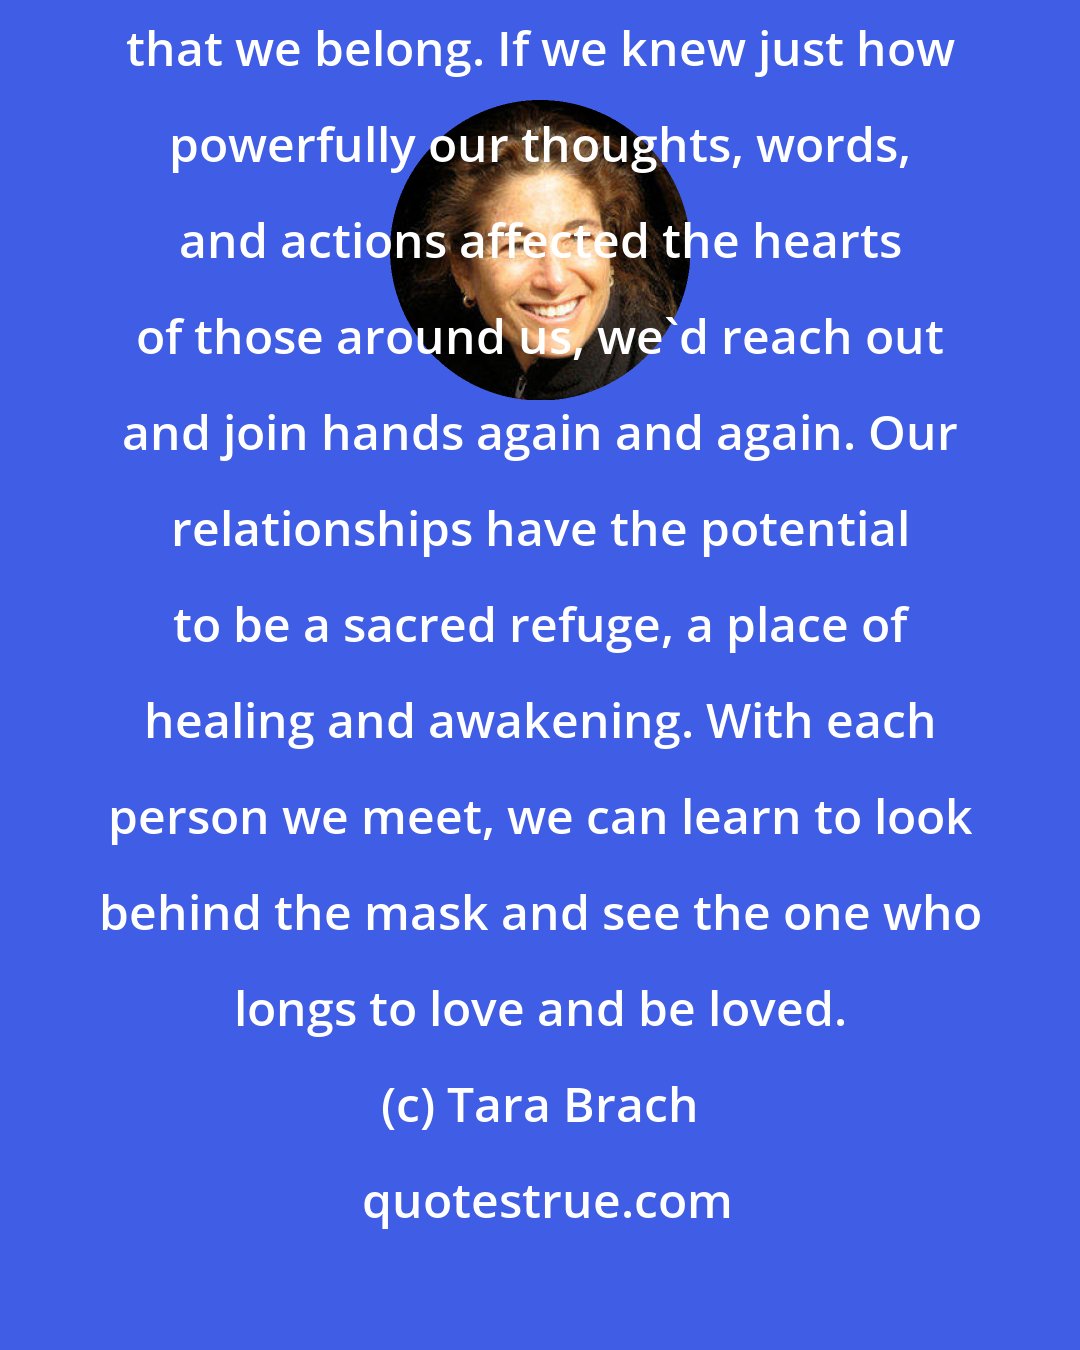 Tara Brach: Most of us need to be reminded that we are good, that we are lovable, that we belong. If we knew just how powerfully our thoughts, words, and actions affected the hearts of those around us, we'd reach out and join hands again and again. Our relationships have the potential to be a sacred refuge, a place of healing and awakening. With each person we meet, we can learn to look behind the mask and see the one who longs to love and be loved.